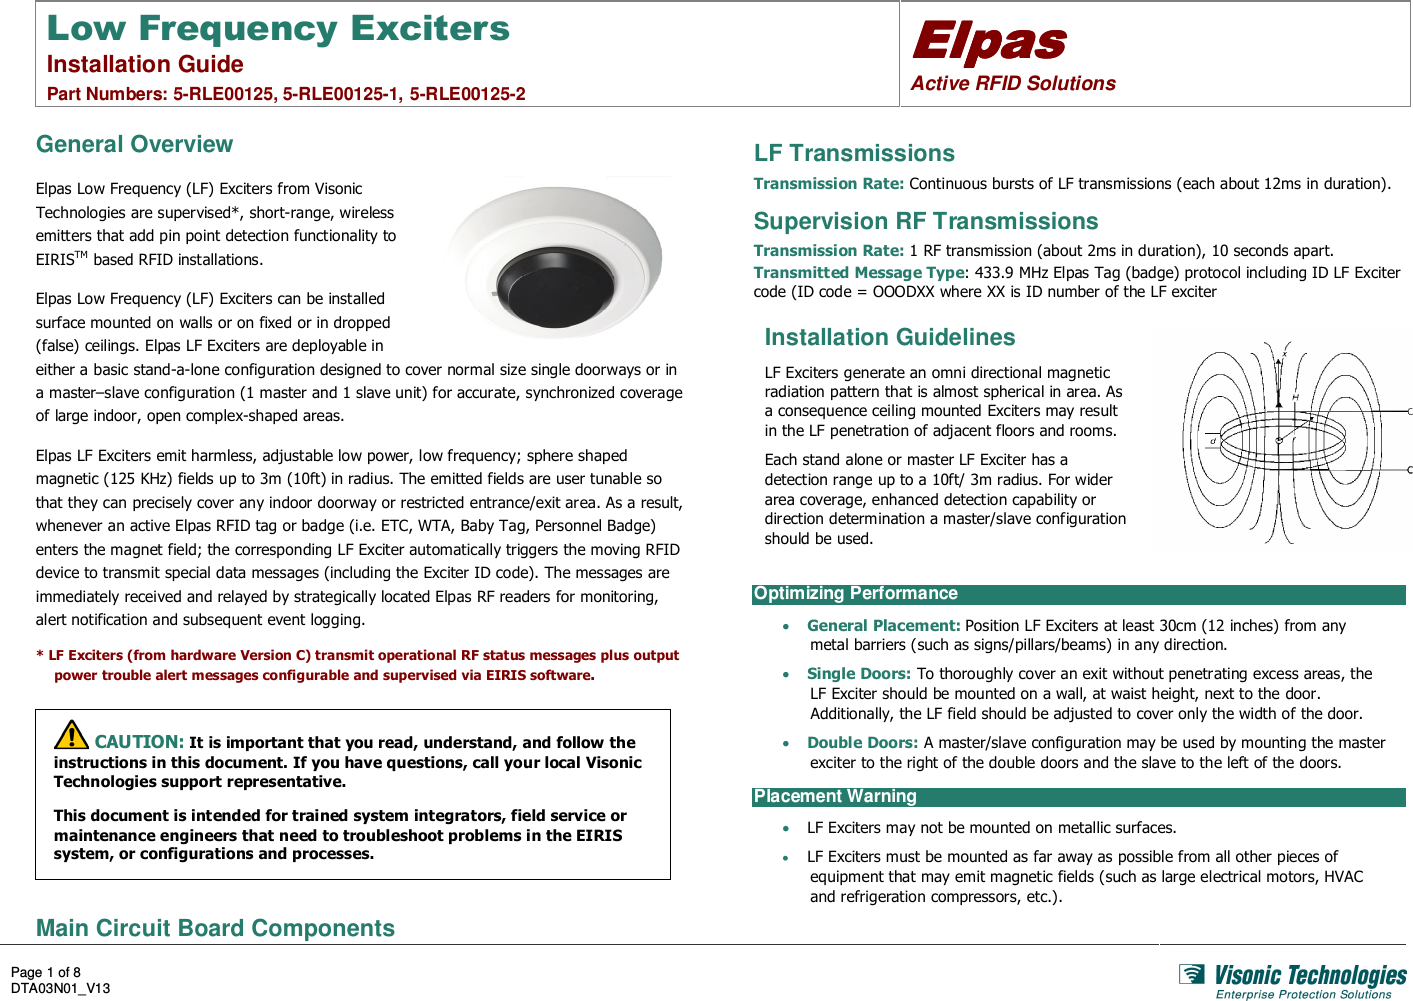 Low Frequency Exciters Installation Guide  Part Numbers: 5-RLE00125, 5-RLE00125-1, 5-RLE00125-2 ElpasElpasElpasElpas    Active RFID Solutions  Page 1 of 8 DTA03N01_V13    General Overview Elpas Low Frequency (LF) Exciters from Visonic Technologies are supervised*, short-range, wireless emitters that add pin point detection functionality to EIRISTM based RFID installations. Elpas Low Frequency (LF) Exciters can be installed surface mounted on walls or on fixed or in dropped (false) ceilings. Elpas LF Exciters are deployable in either a basic stand-a-lone configuration designed to cover normal size single doorways or in a master–slave configuration (1 master and 1 slave unit) for accurate, synchronized coverage of large indoor, open complex-shaped areas. Elpas LF Exciters emit harmless, adjustable low power, low frequency; sphere shaped magnetic (125 KHz) fields up to 3m (10ft) in radius. The emitted fields are user tunable so that they can precisely cover any indoor doorway or restricted entrance/exit area. As a result, whenever an active Elpas RFID tag or badge (i.e. ETC, WTA, Baby Tag, Personnel Badge) enters the magnet field; the corresponding LF Exciter automatically triggers the moving RFID device to transmit special data messages (including the Exciter ID code). The messages are immediately received and relayed by strategically located Elpas RF readers for monitoring, alert notification and subsequent event logging. * LF Exciters (from hardware Version C) transmit operational RF status messages plus output power trouble alert messages configurable and supervised via EIRIS software.   CAUTION: It is important that you read, understand, and follow the instructions in this document. If you have questions, call your local Visonic Technologies support representative. This document is intended for trained system integrators, field service or maintenance engineers that need to troubleshoot problems in the EIRIS system, or configurations and processes.  LF Transmissions Transmission Rate: Continuous bursts of LF transmissions (each about 12ms in duration). Supervision RF Transmissions Transmission Rate: 1 RF transmission (about 2ms in duration), 10 seconds apart. Transmitted Message Type: 433.9 MHz Elpas Tag (badge) protocol including ID LF Exciter code (ID code = OOODXX where XX is ID number of the LF exciter  Installation Guidelines LF Exciters generate an omni directional magnetic radiation pattern that is almost spherical in area. As a consequence ceiling mounted Exciters may result in the LF penetration of adjacent floors and rooms. Each stand alone or master LF Exciter has a detection range up to a 10ft/ 3m radius. For wider area coverage, enhanced detection capability or direction determination a master/slave configuration should be used. Optimizing Performance • General Placement: Position LF Exciters at least 30cm (12 inches) from any metal barriers (such as signs/pillars/beams) in any direction. • Single Doors: To thoroughly cover an exit without penetrating excess areas, the LF Exciter should be mounted on a wall, at waist height, next to the door. Additionally, the LF field should be adjusted to cover only the width of the door. • Double Doors: A master/slave configuration may be used by mounting the master exciter to the right of the double doors and the slave to the left of the doors. Placement Warning • LF Exciters may not be mounted on metallic surfaces. • LF Exciters must be mounted as far away as possible from all other pieces of equipment that may emit magnetic fields (such as large electrical motors, HVAC and refrigeration compressors, etc.). Main Circuit Board Components 